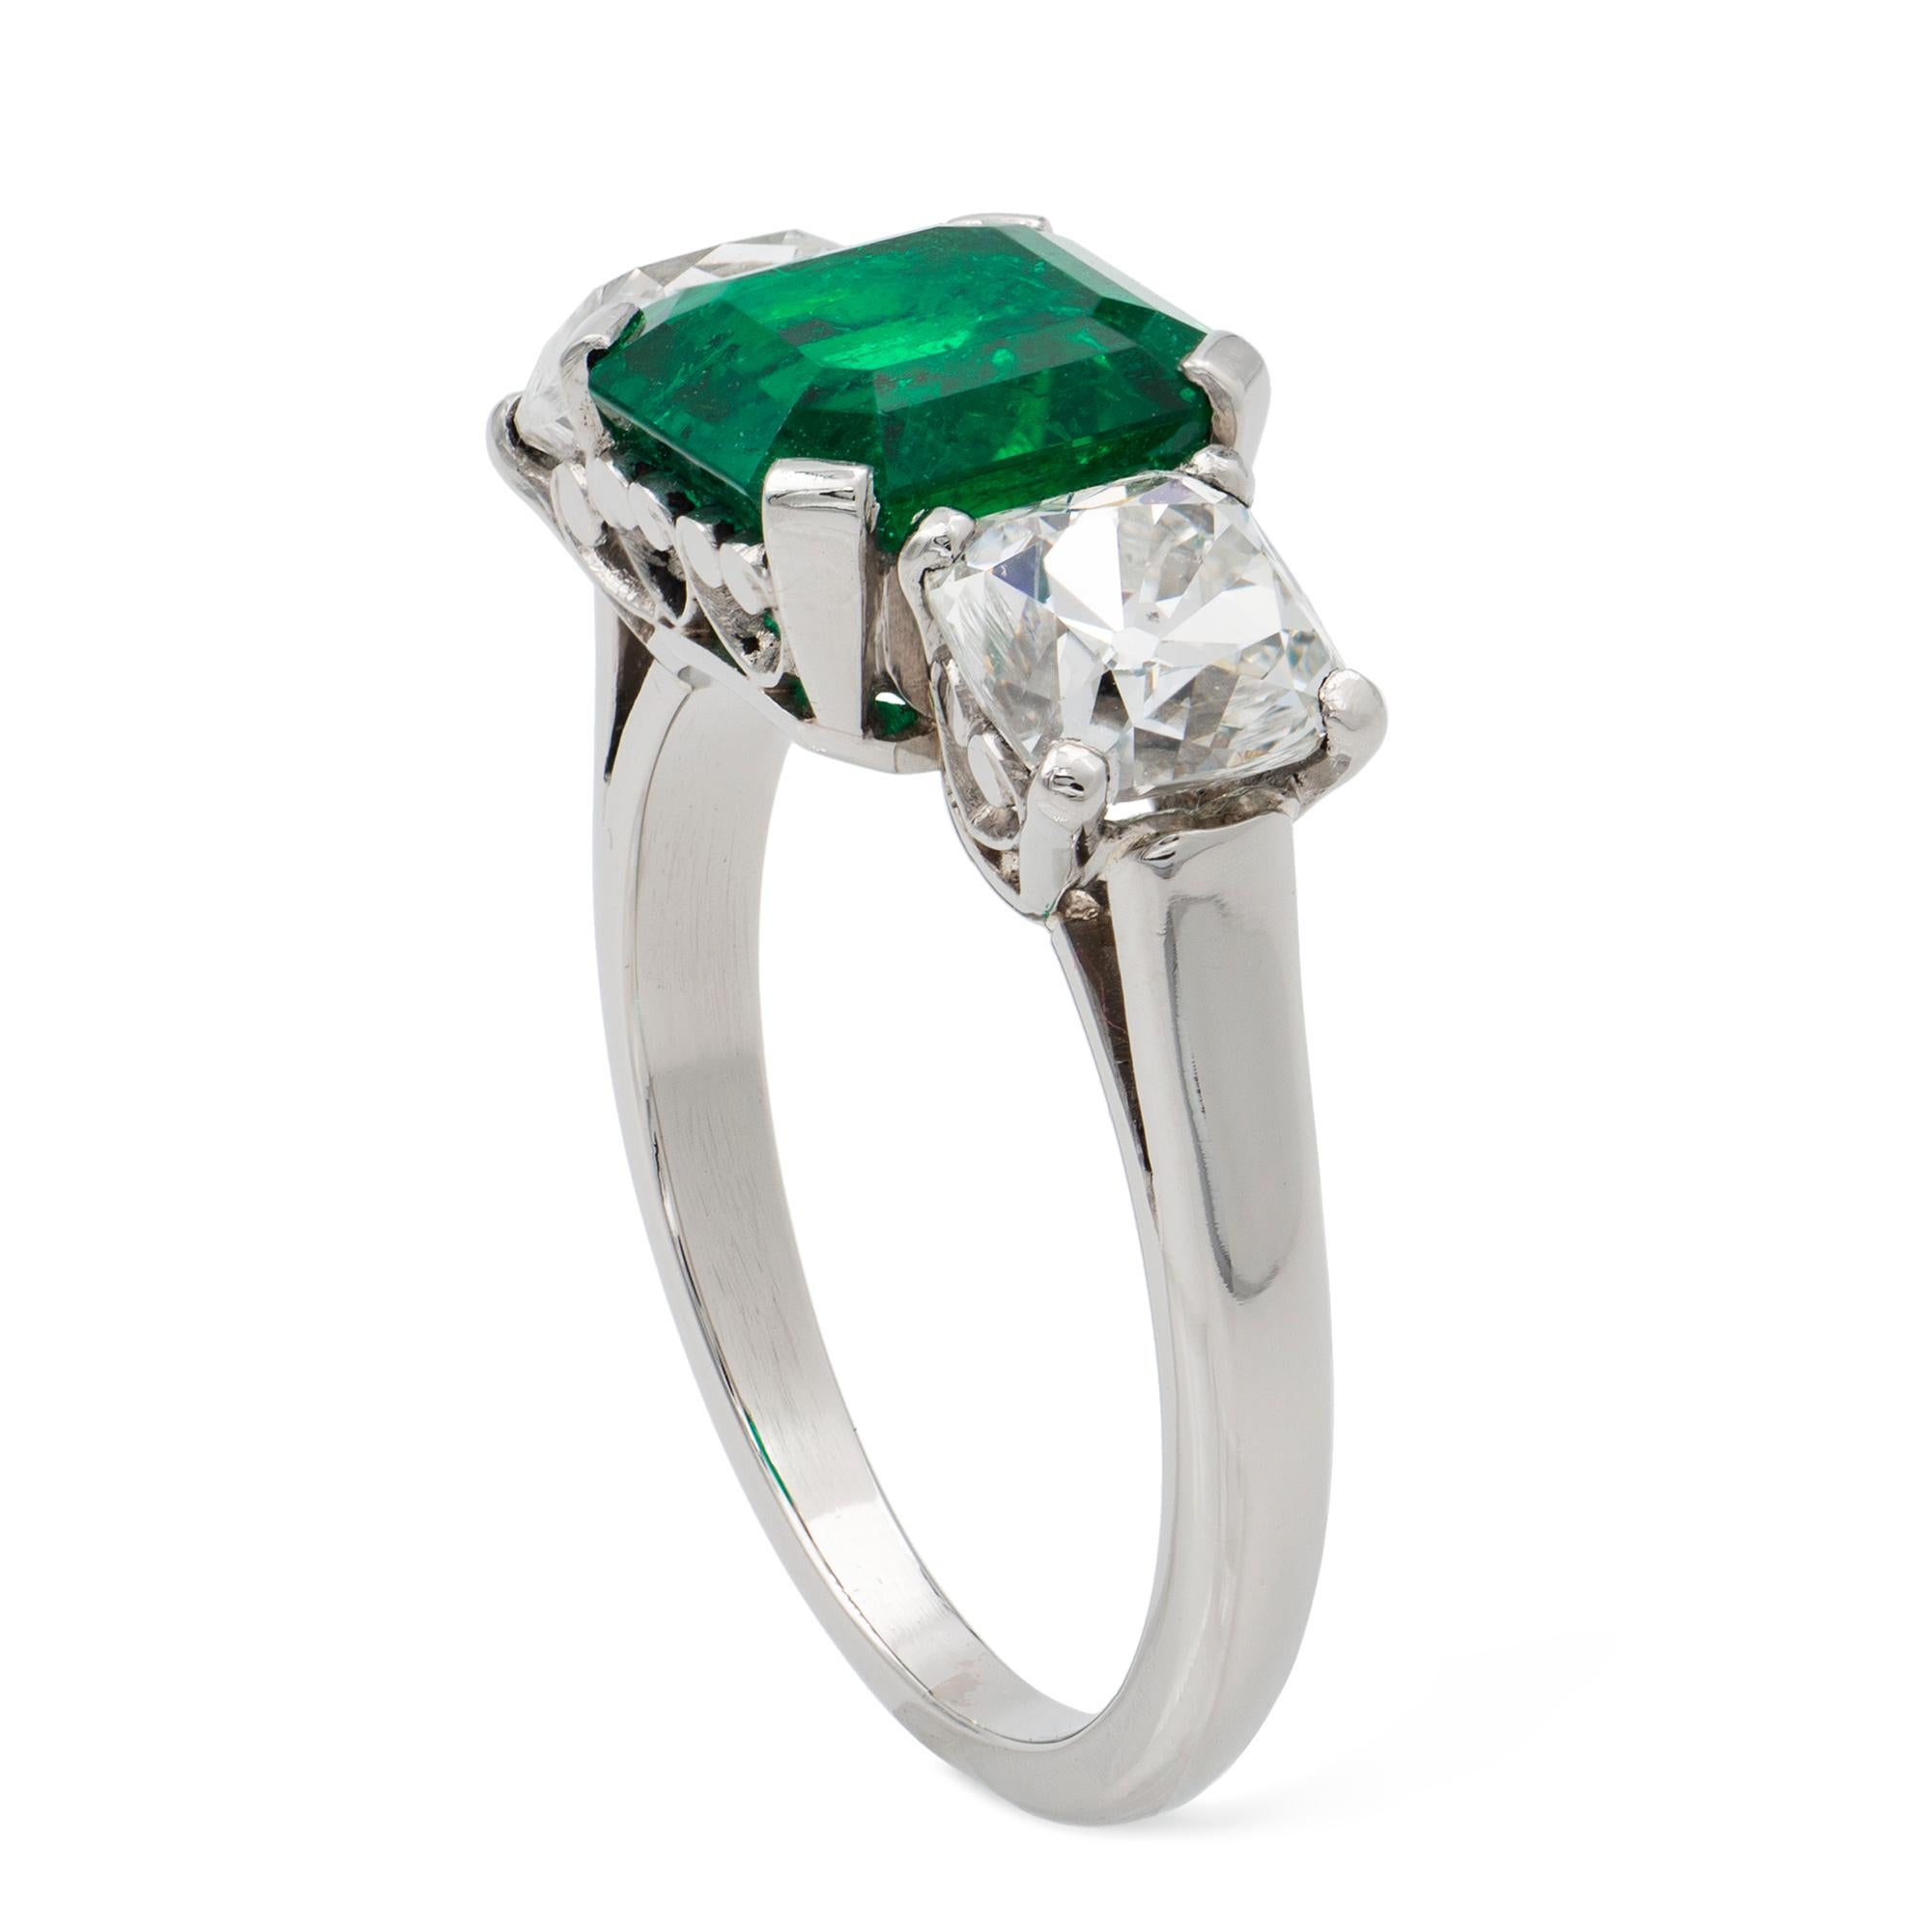 An emerald and diamond three stone ring, the octagonal-cut emerald weighing 2.44 carats accompanied by GCS Report stating to be of Colombian origin, set between two modern Peruzzi-cut diamonds weighing 1.02 and 1.08 carats, all mounted in platinum